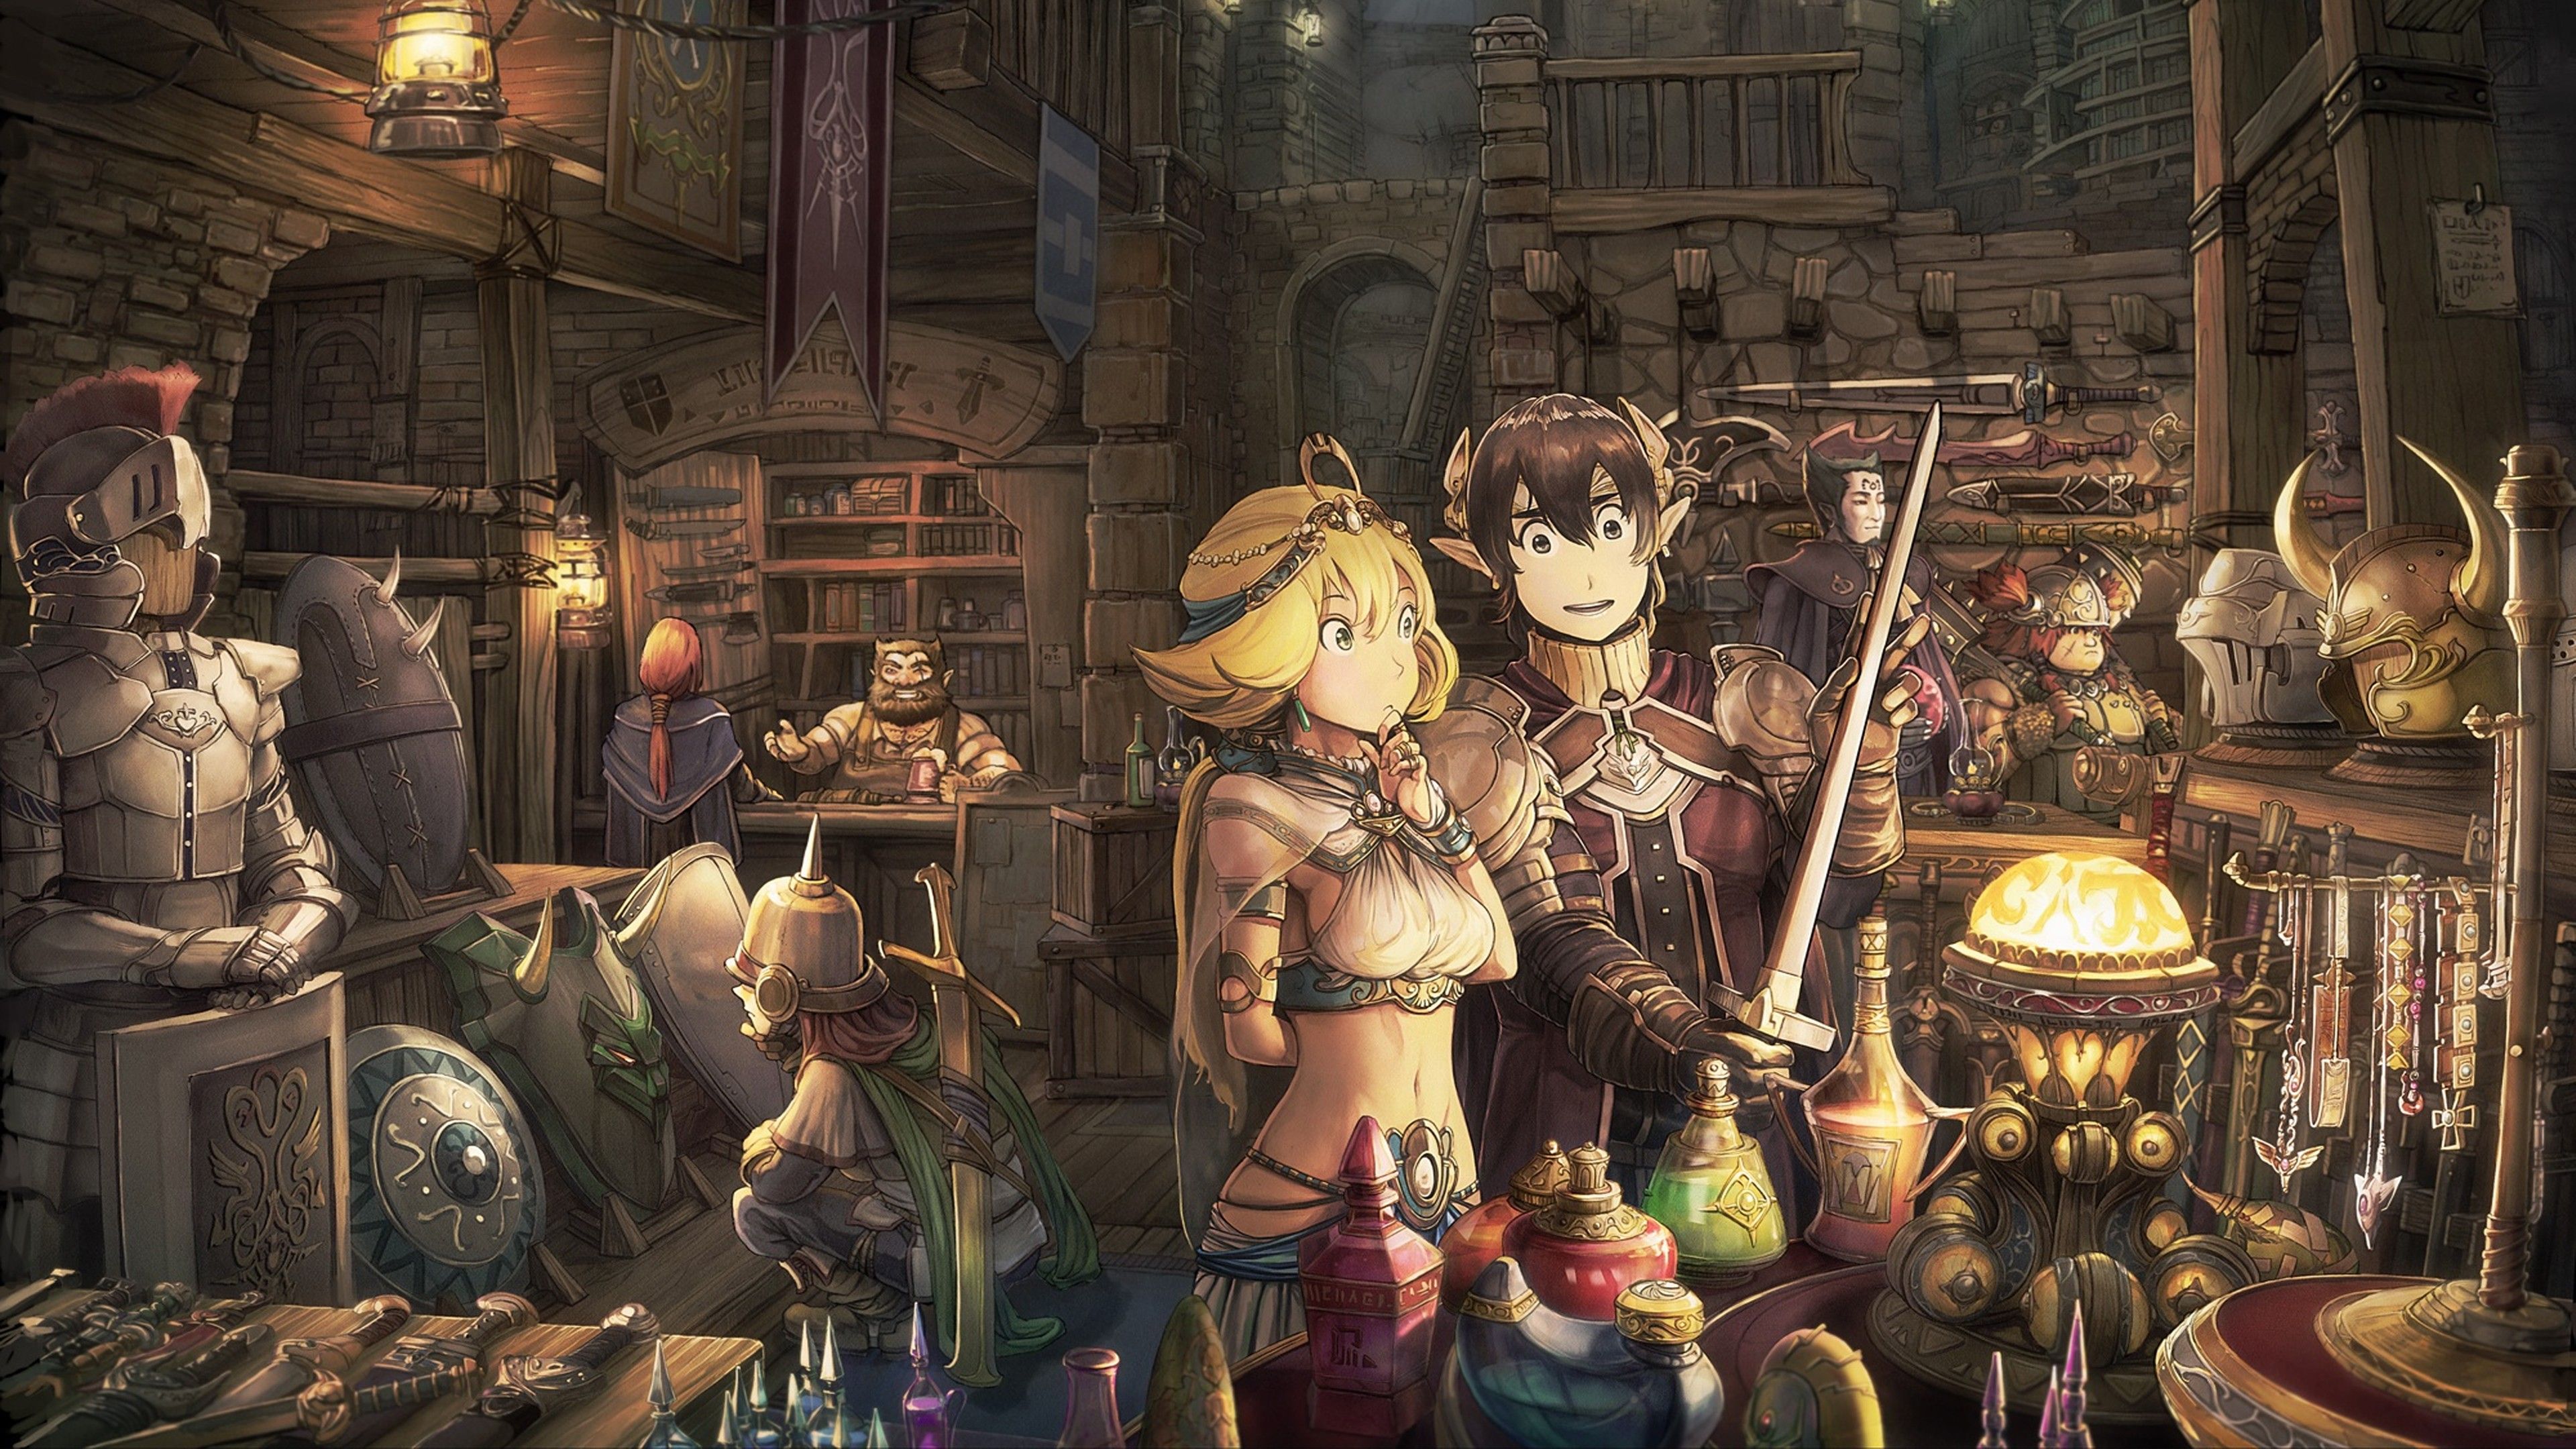 Wallpaper, anime, room, fantasy city, mythology, fantasy armor, Friends, shopping, detailed, screenshot, ancient history, pc game, middle ages 3840x2160